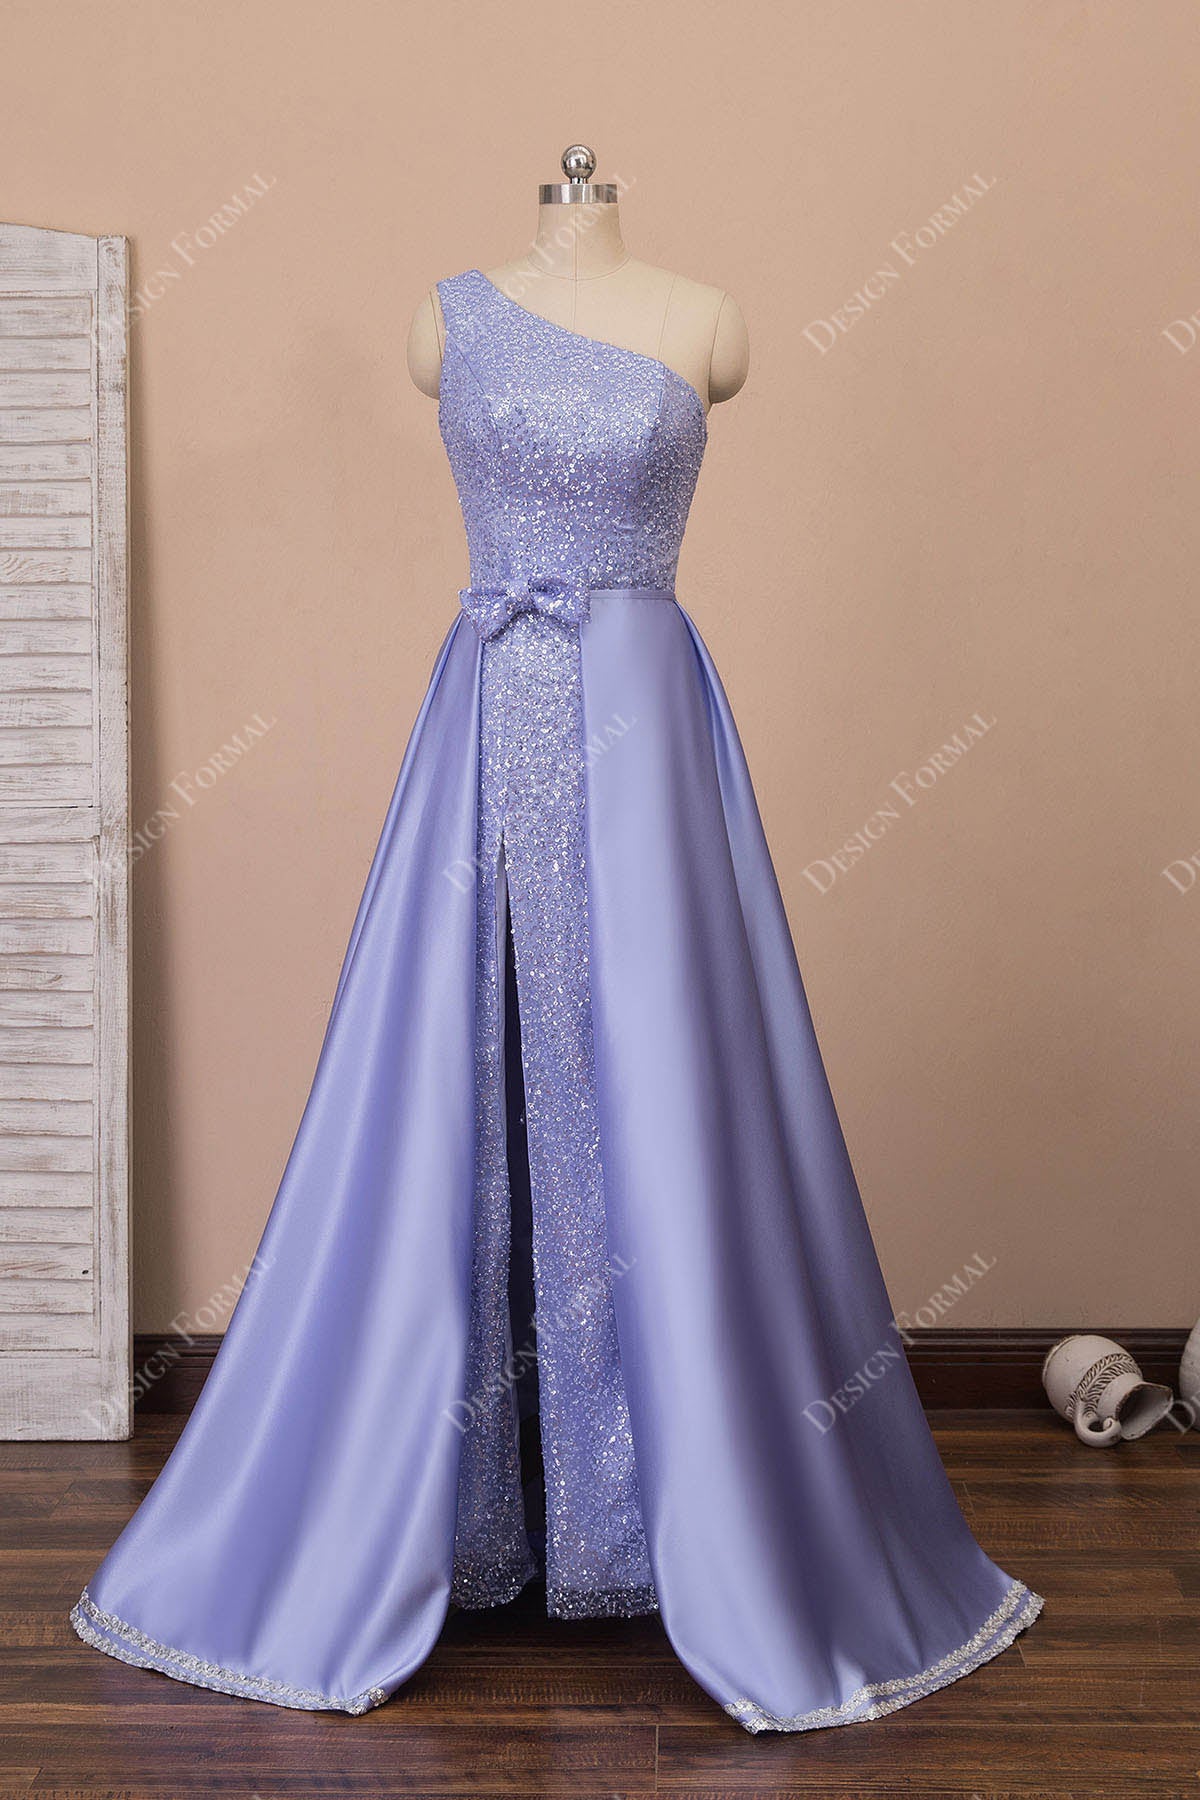 Lavender Glitter One Shoulder Sheath Gown with Satin Overskirt